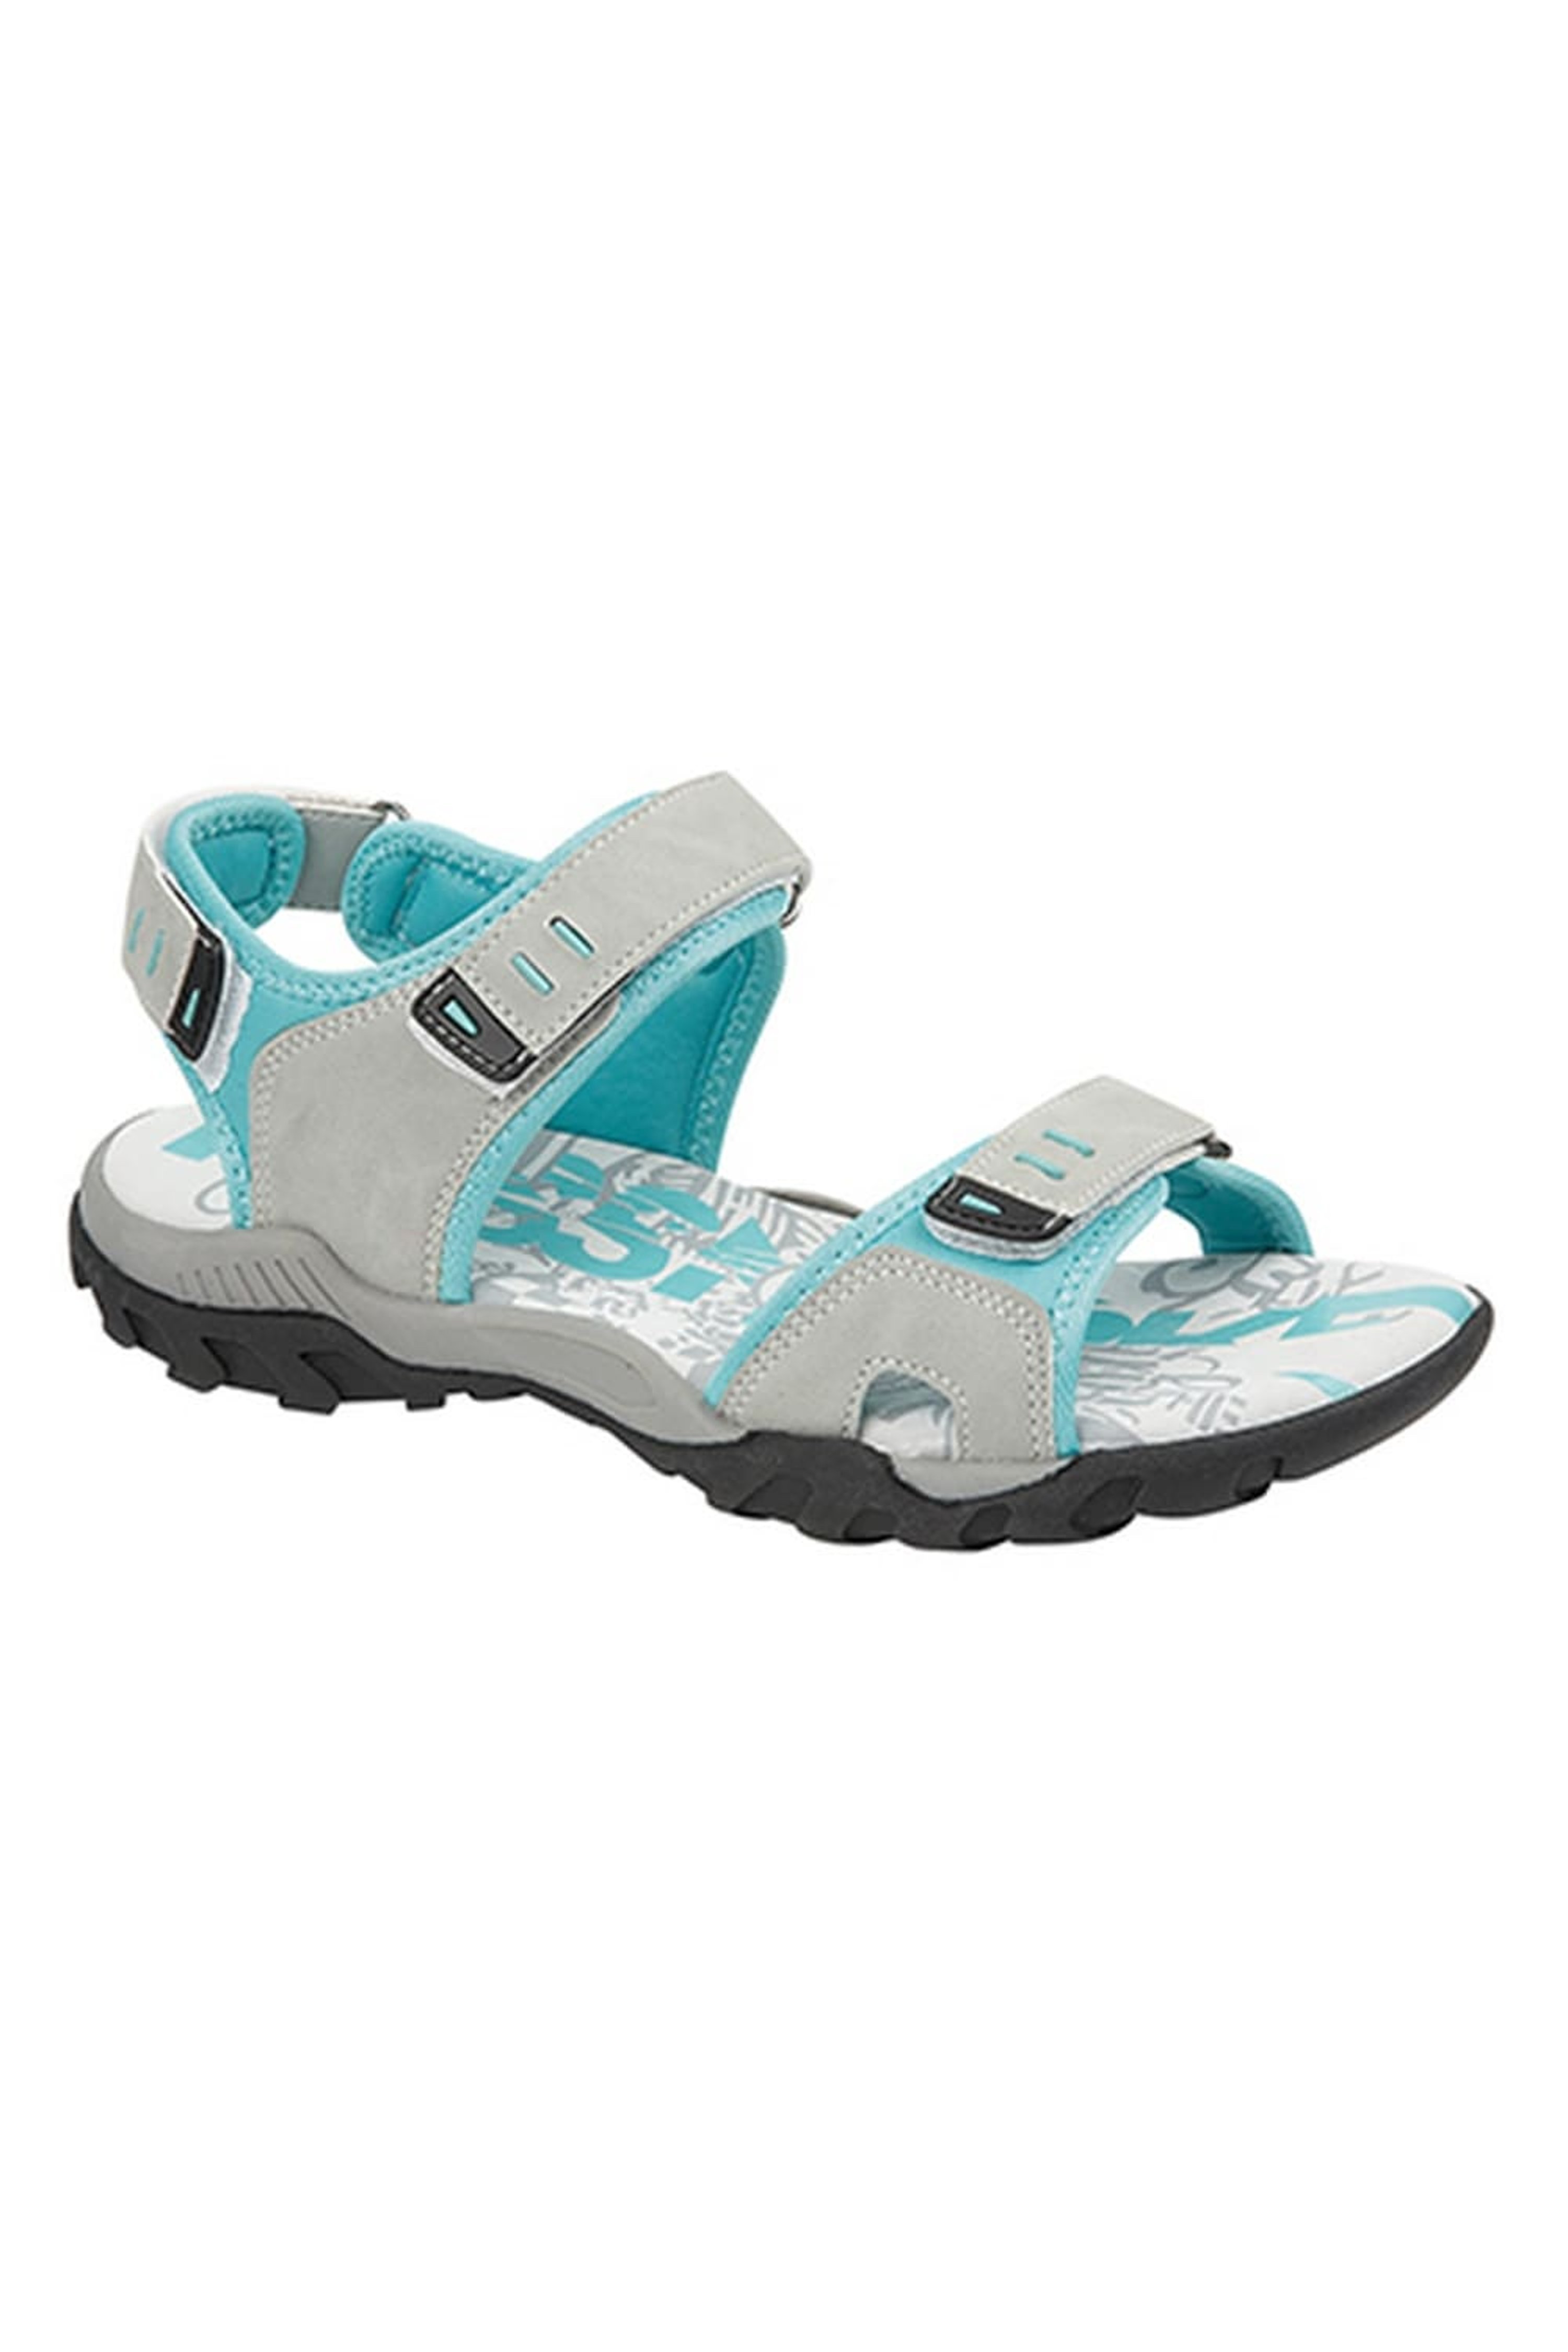 PDQ PDQ WOMENS/LADIES TOGGLE & TOUCH FASTENING SPORTS SANDALS (LIGHT GRAY/MINT)